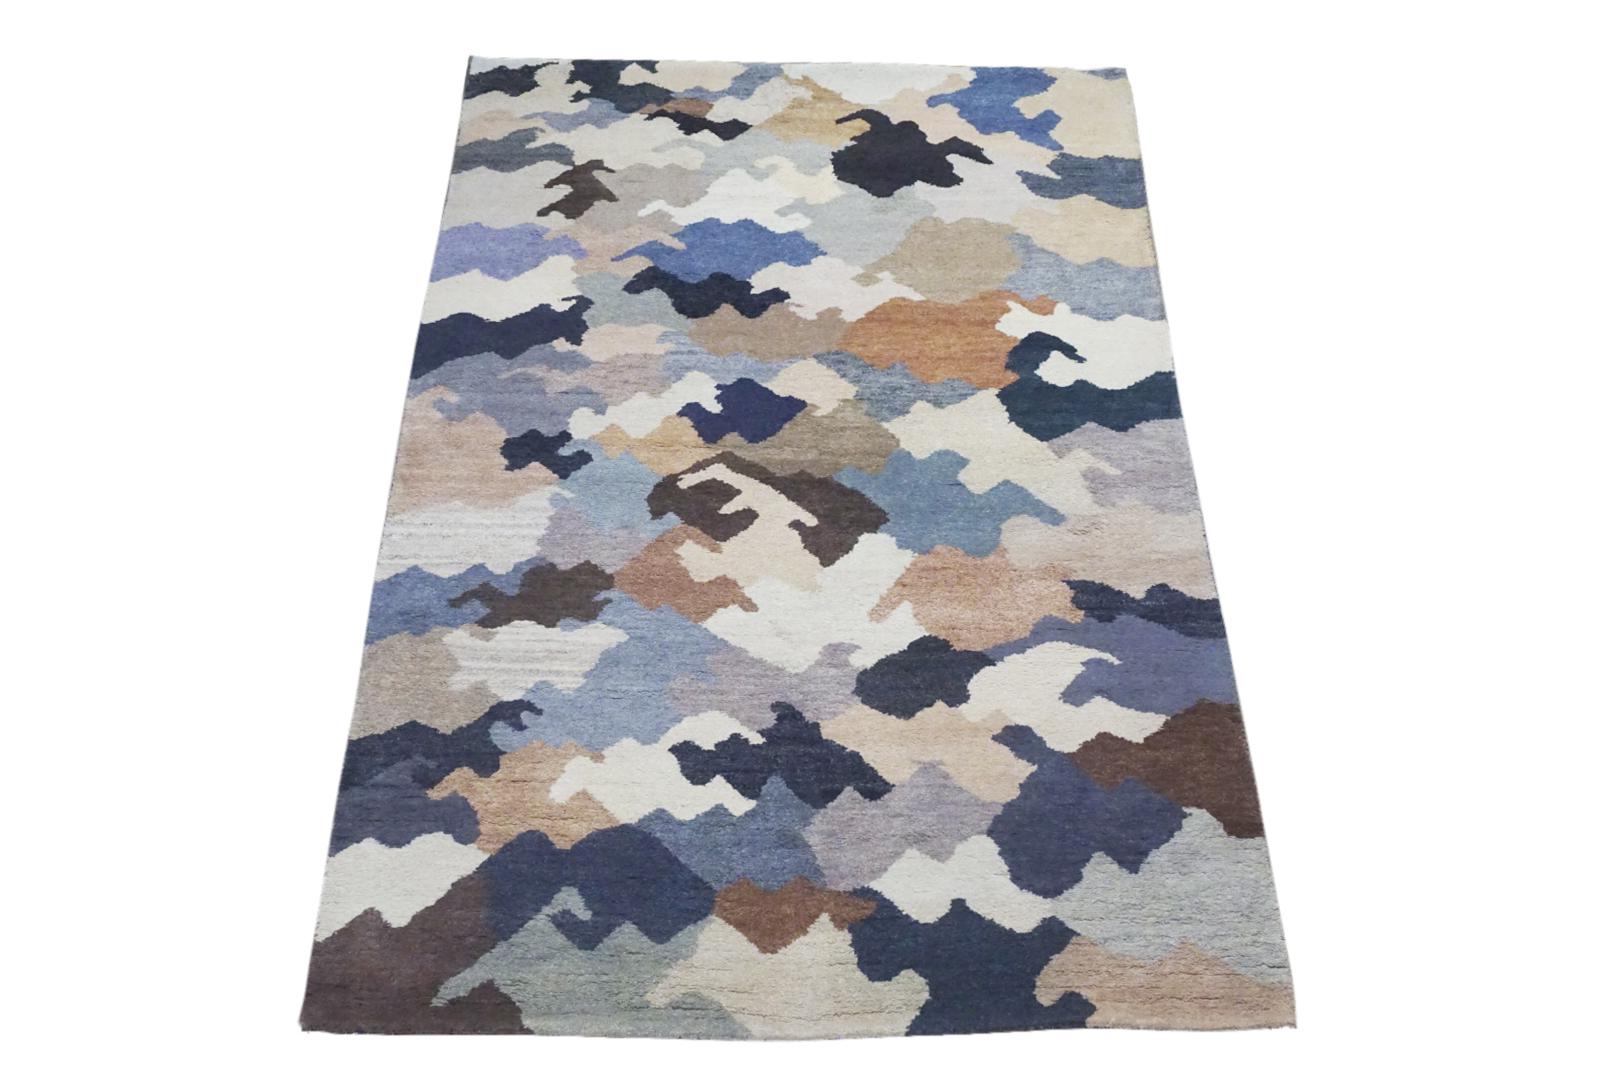 Hand knotted wool pile on a cotton foundation.

Modern multicolored camouflage design.

Dimensions: 6'4